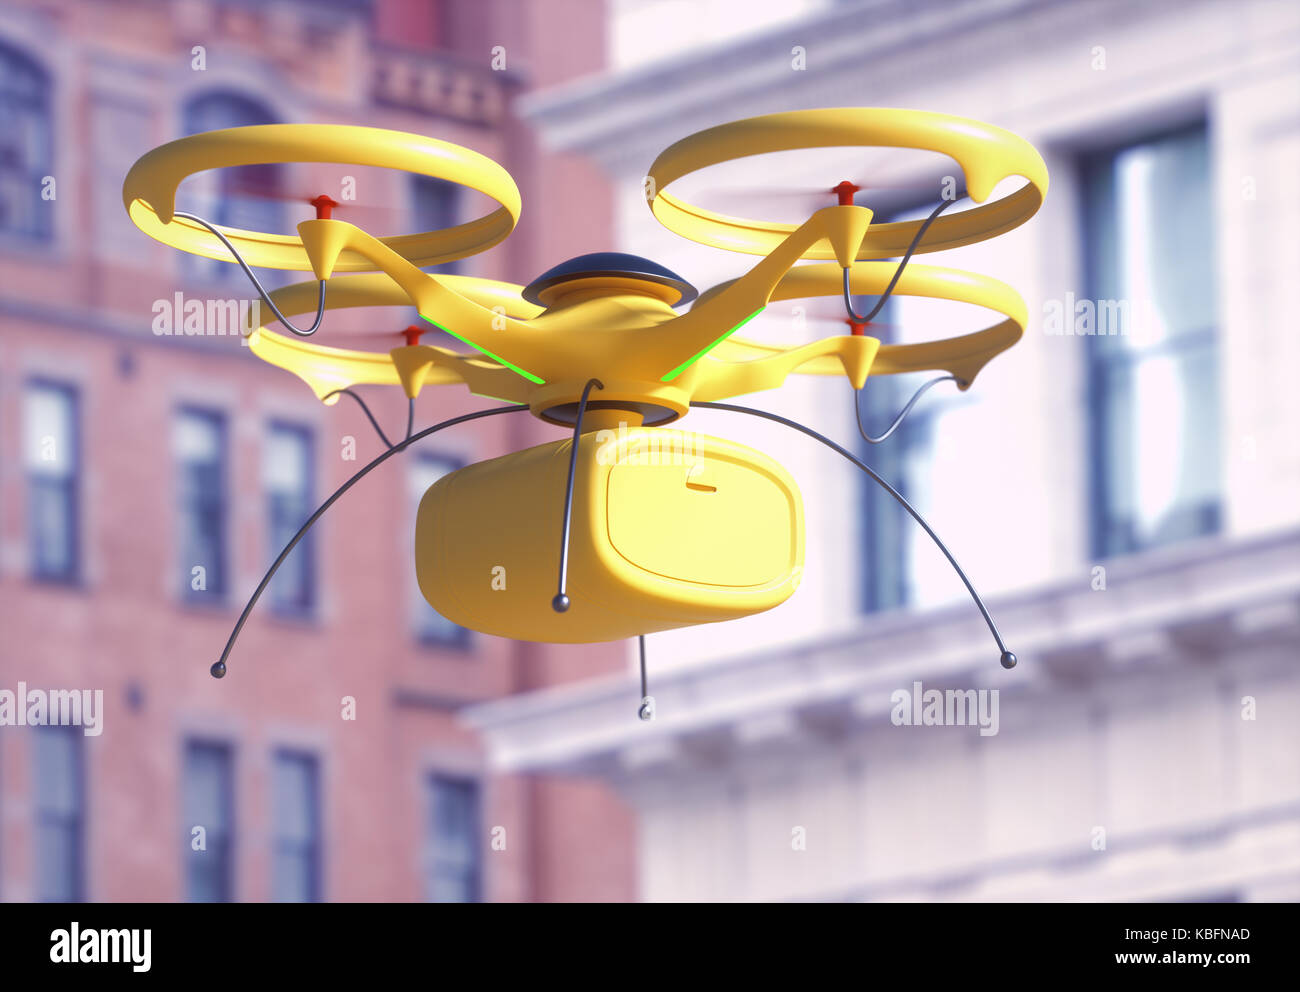 3D illustration. Conceptual image of package delivery by drone. Unmanned aerial vehicle (UAV) utilized to transport packages. Stock Photo